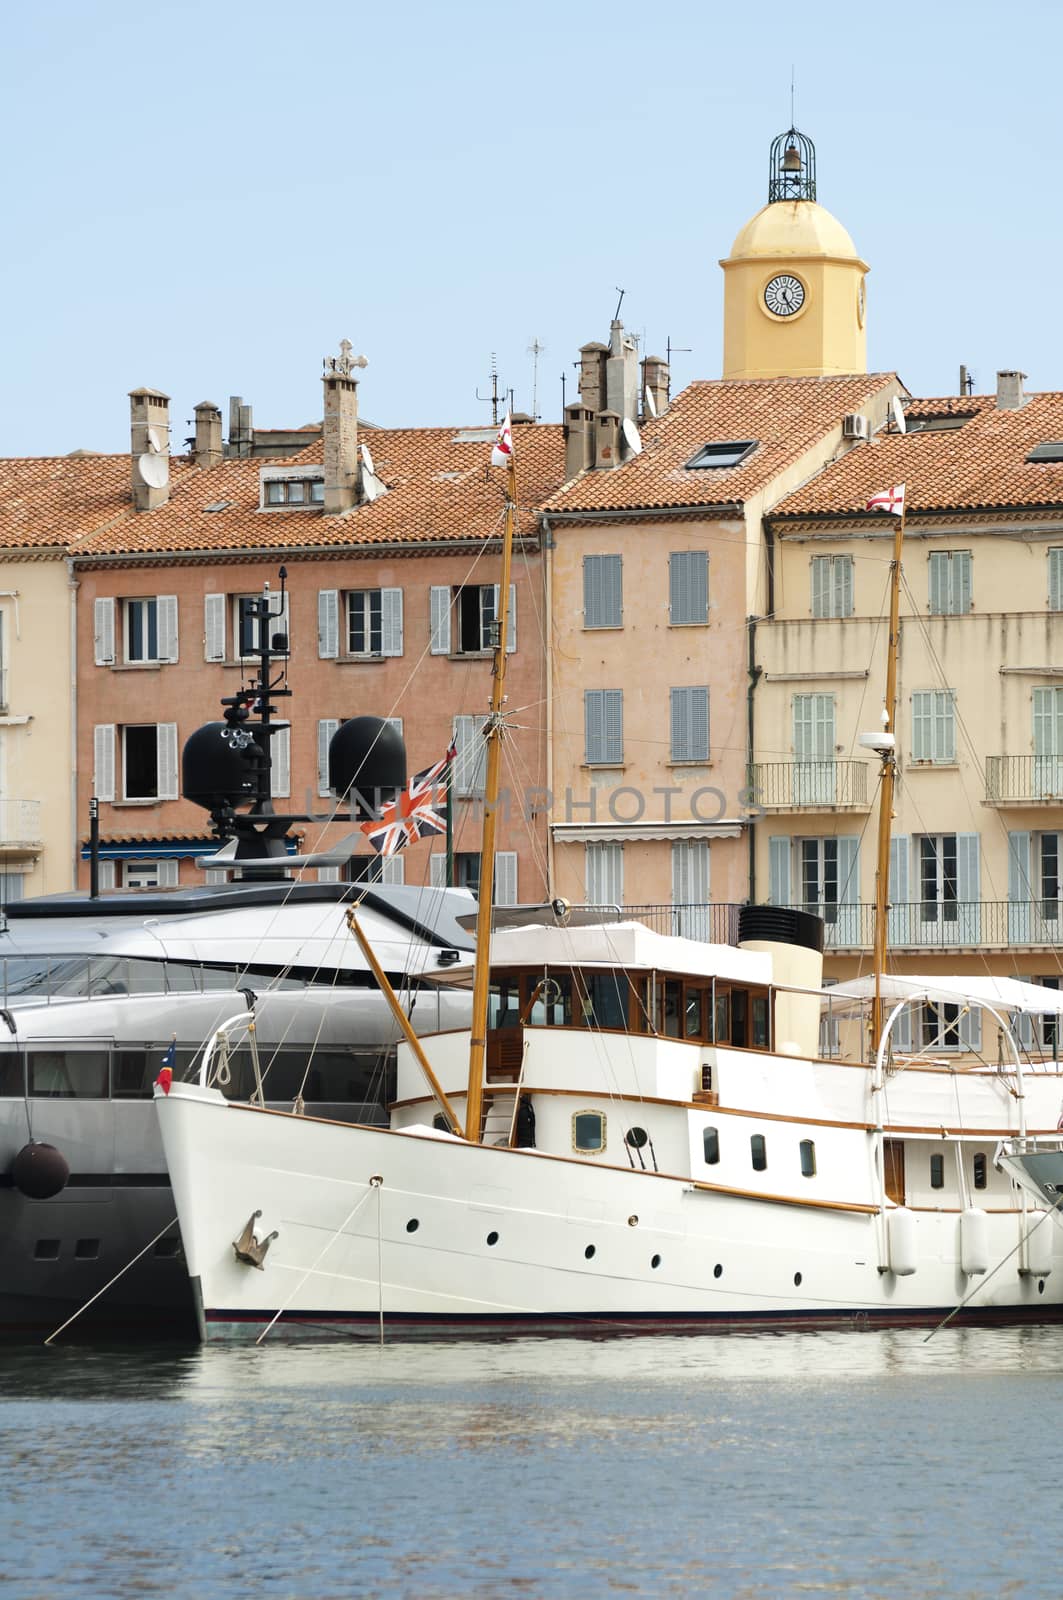 Anchored Yacht in St. Tropez. Ancient buildings on the background.